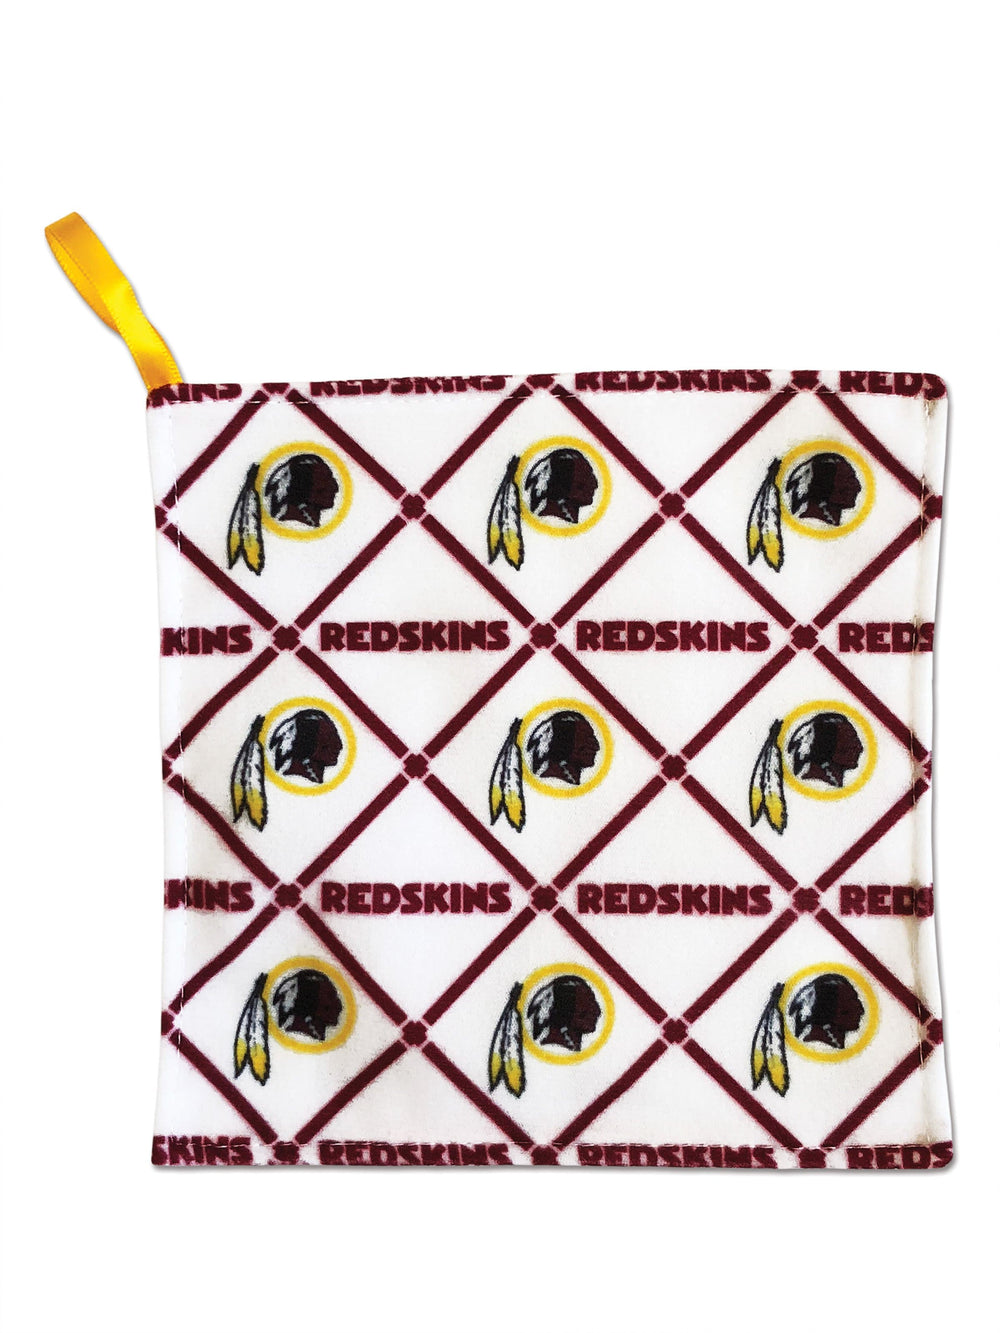 Washington Redskins Rally Paper Baby Paper no points Lil Tulips